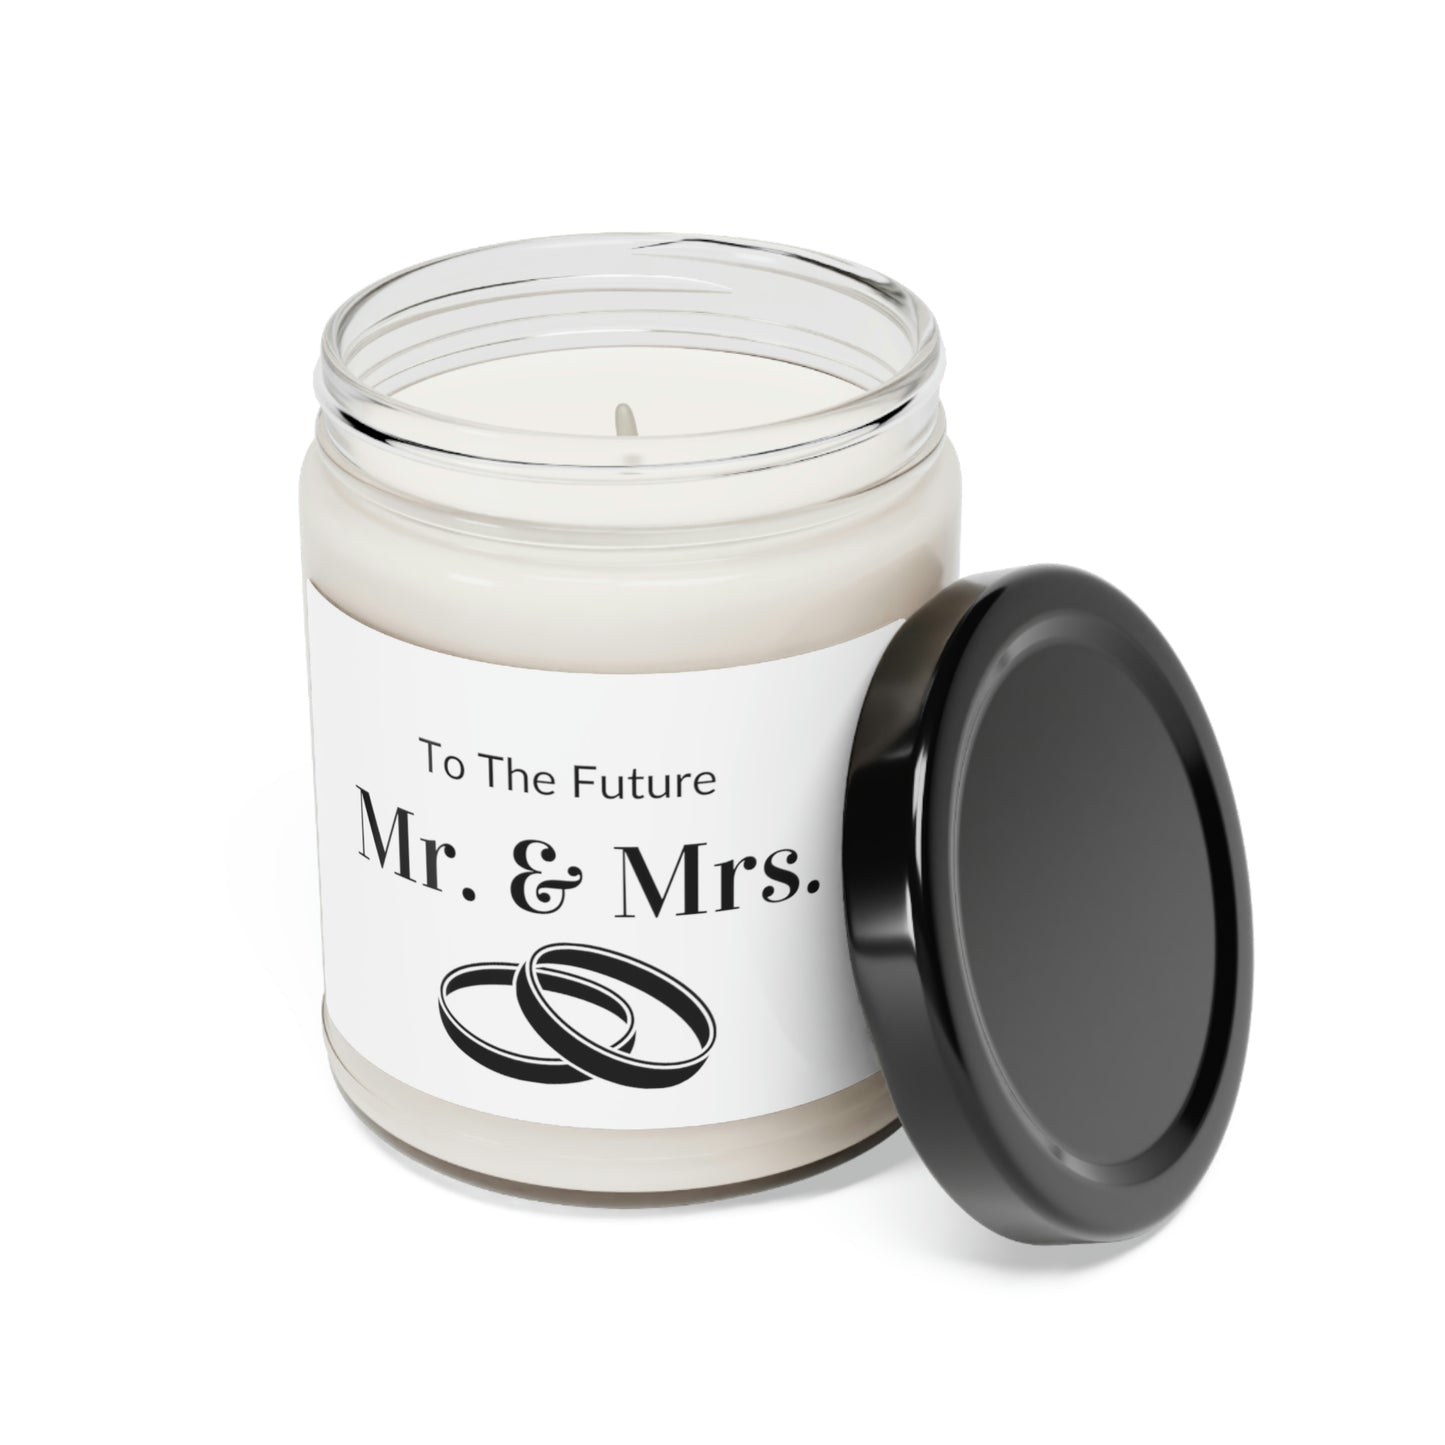 Mr. & Mrs. Wedding Candle, Wedding Gifts, Gifts for her